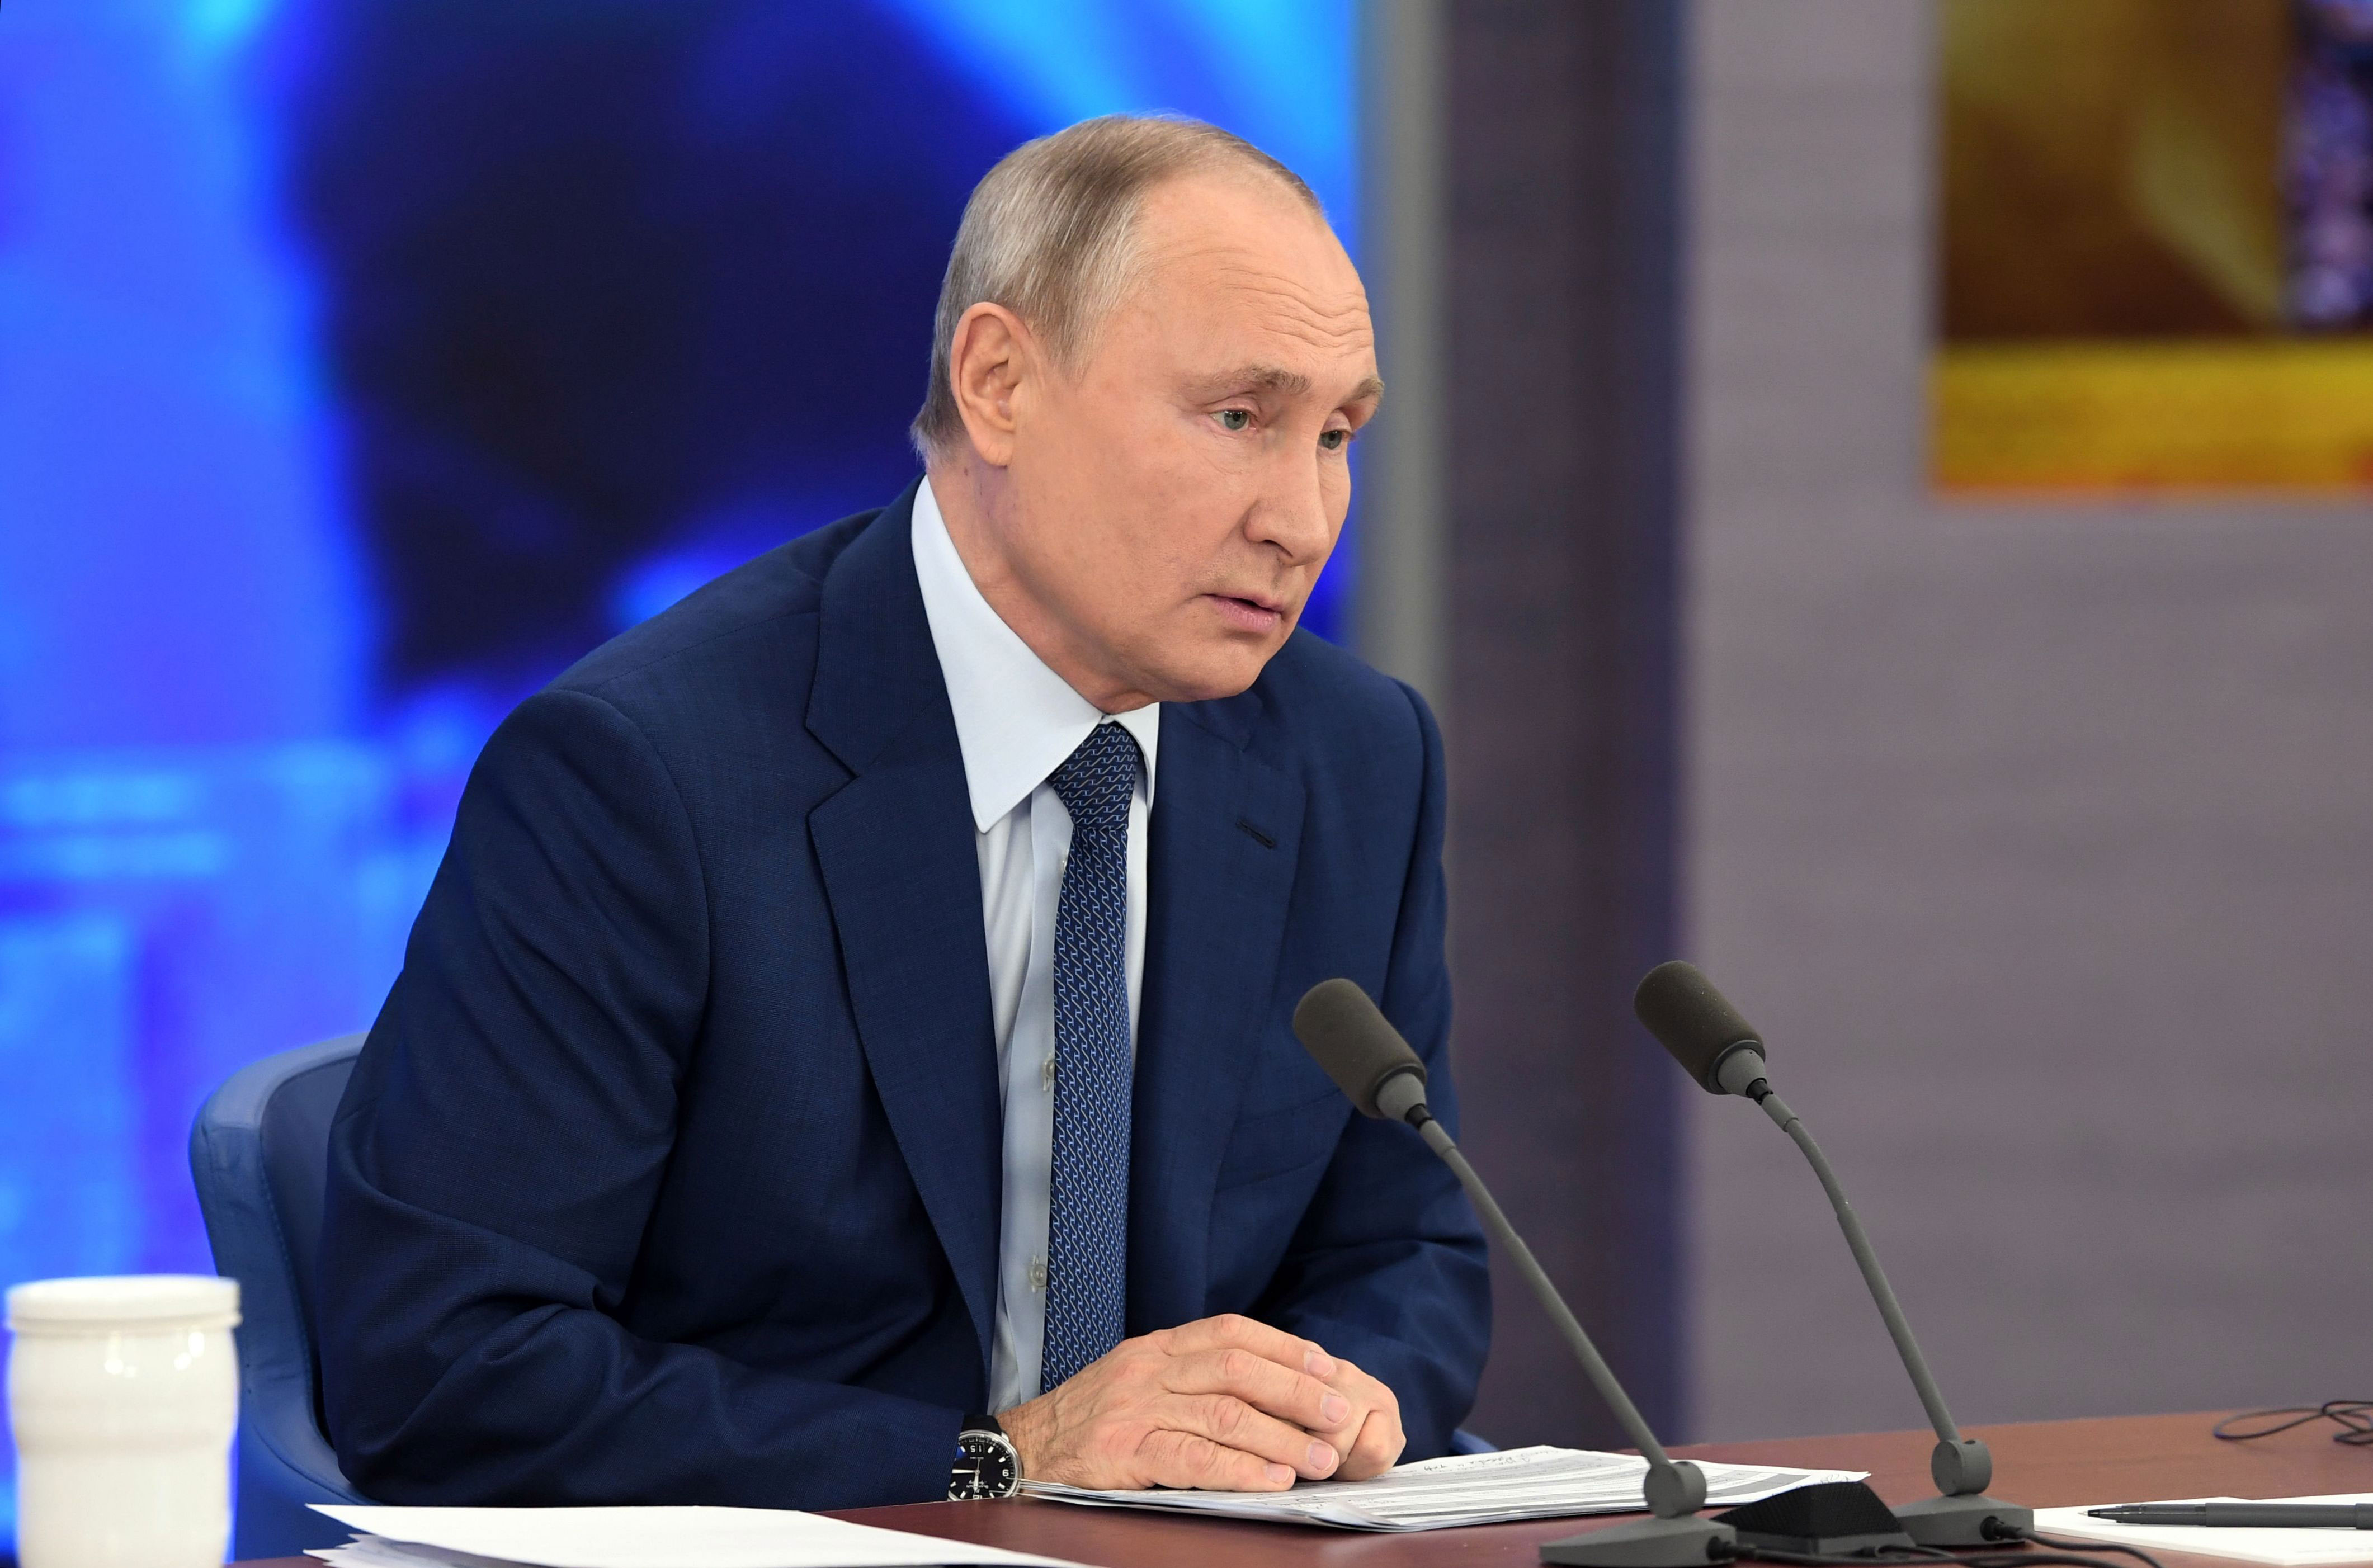 Russian President Vladimir Putin holds via video his annual press conference at the Novo-Ogaryovo state residence outside Moscow on December 17.